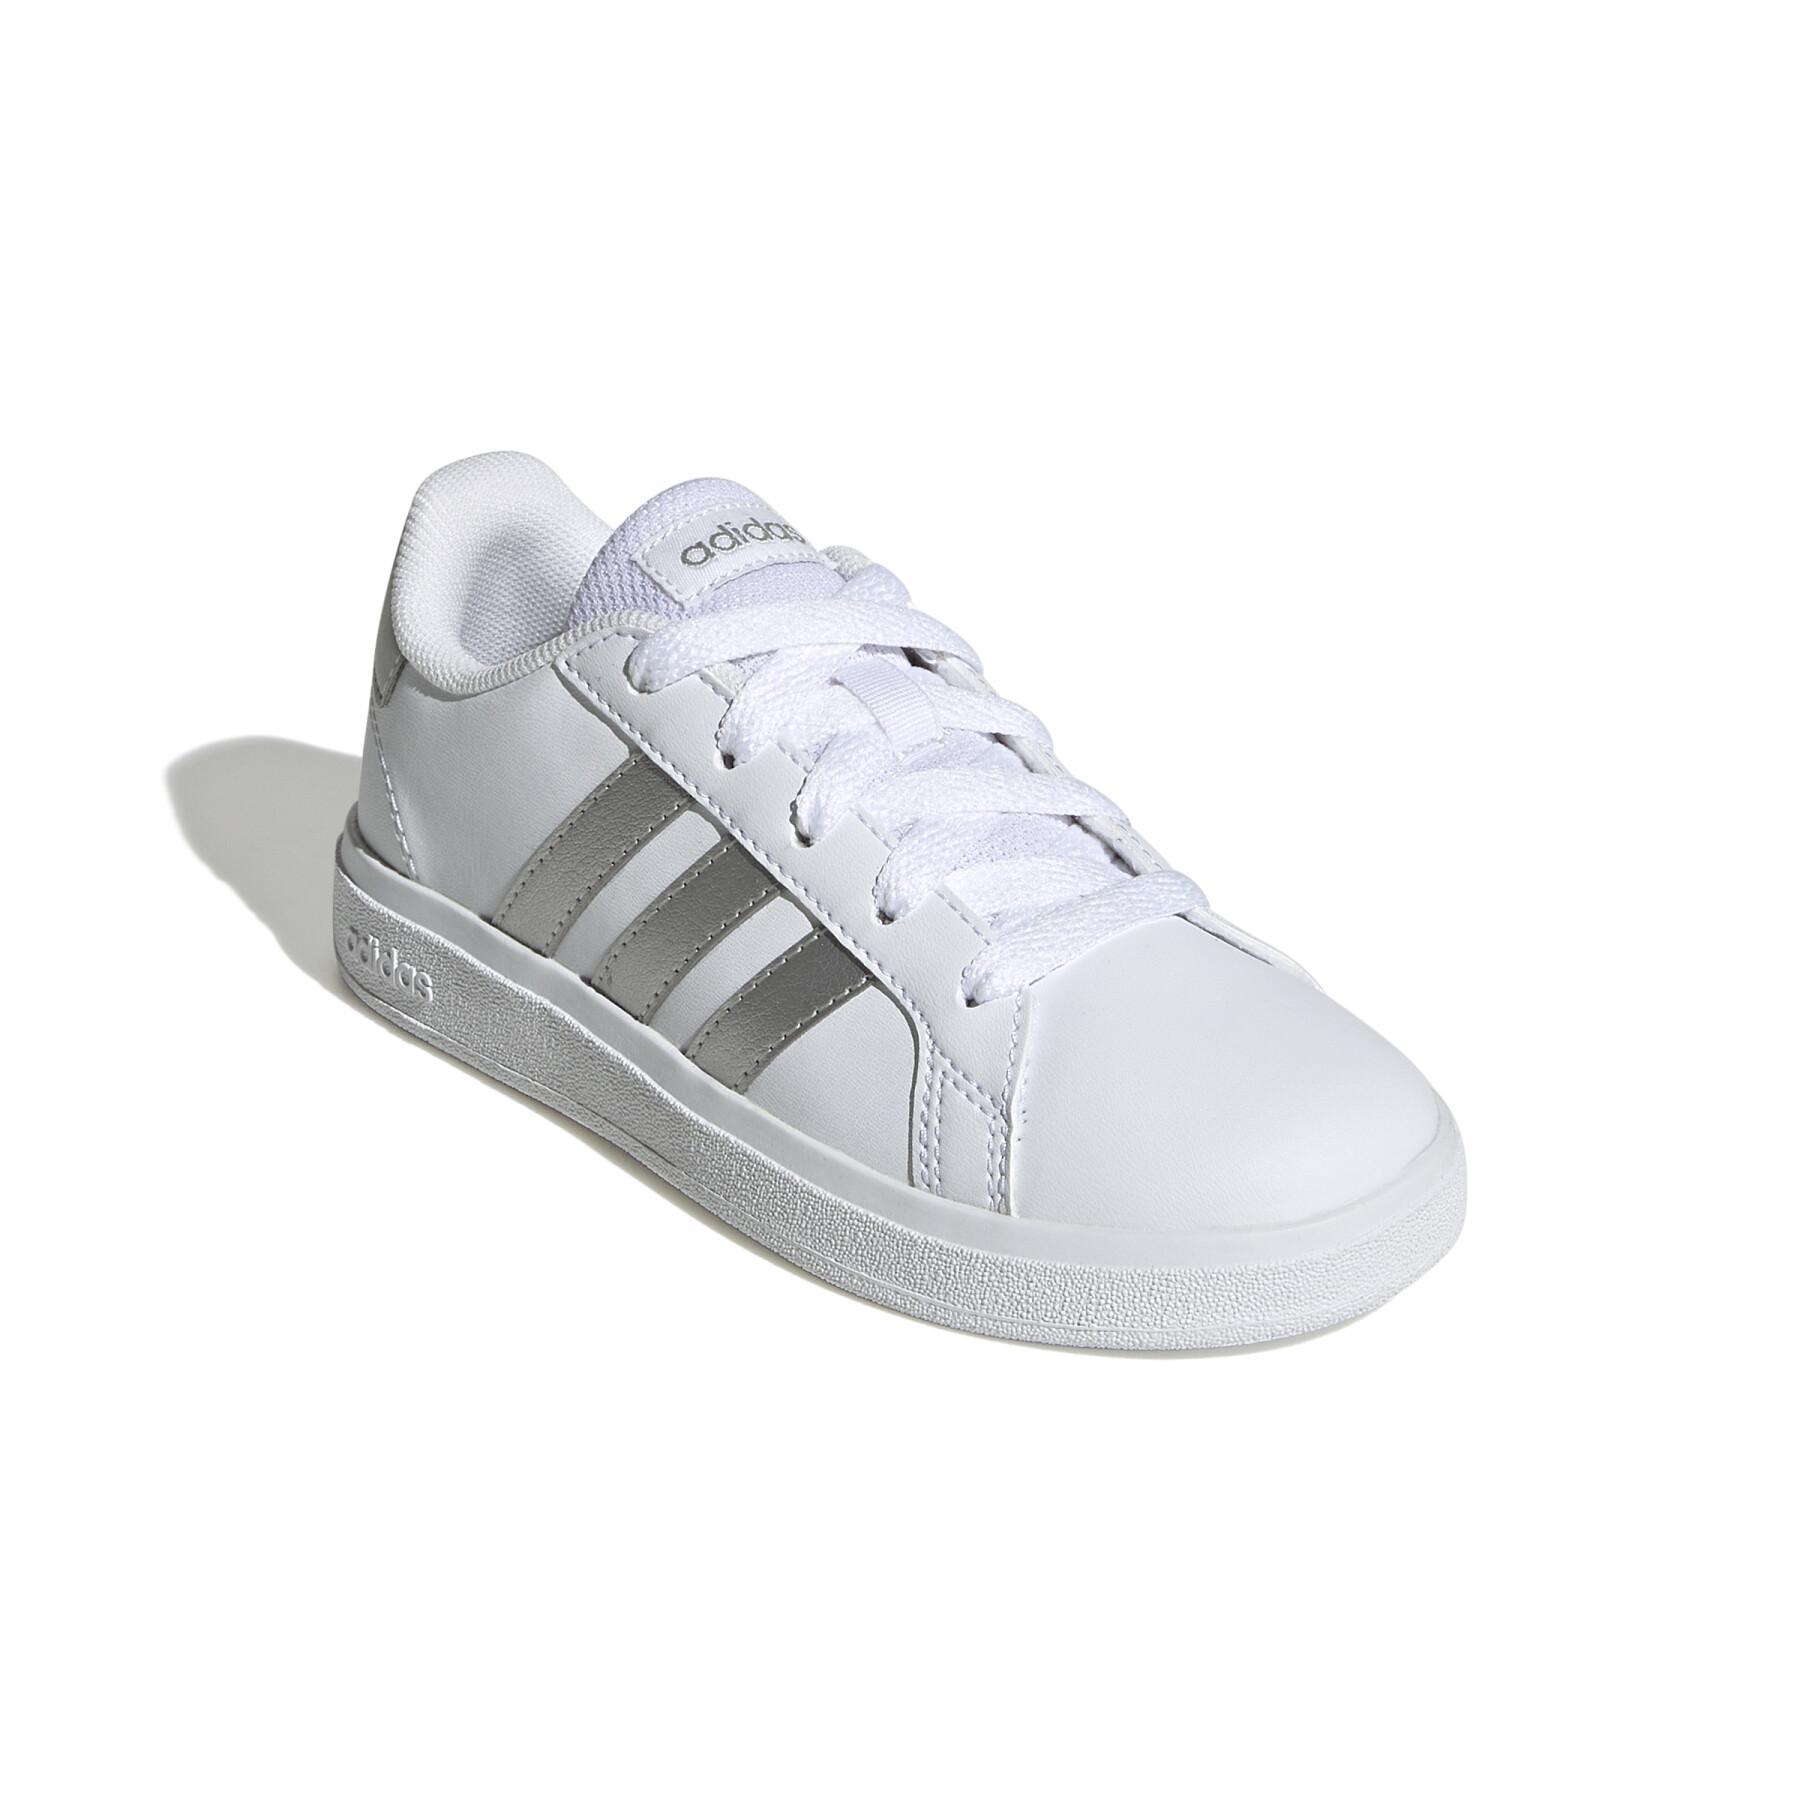 Children's lace-up sneakers adidas